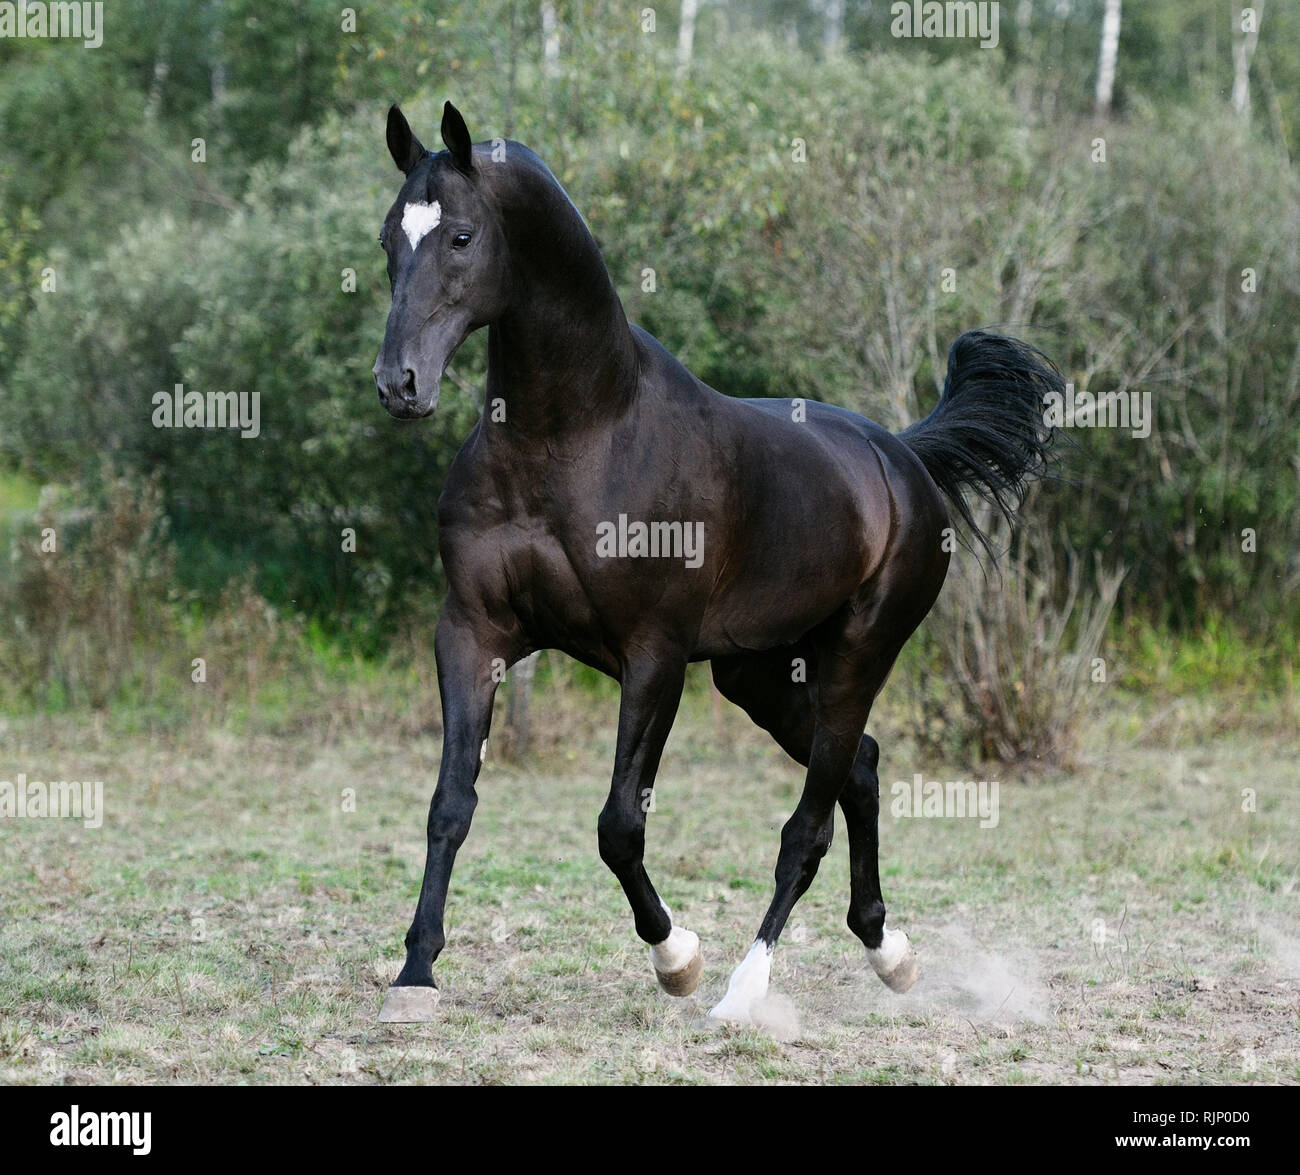 Black akhal teke stallion with white stat on forehead running in the pasture with trees on the background. Horizontal, three quarters, in motion. Stock Photo